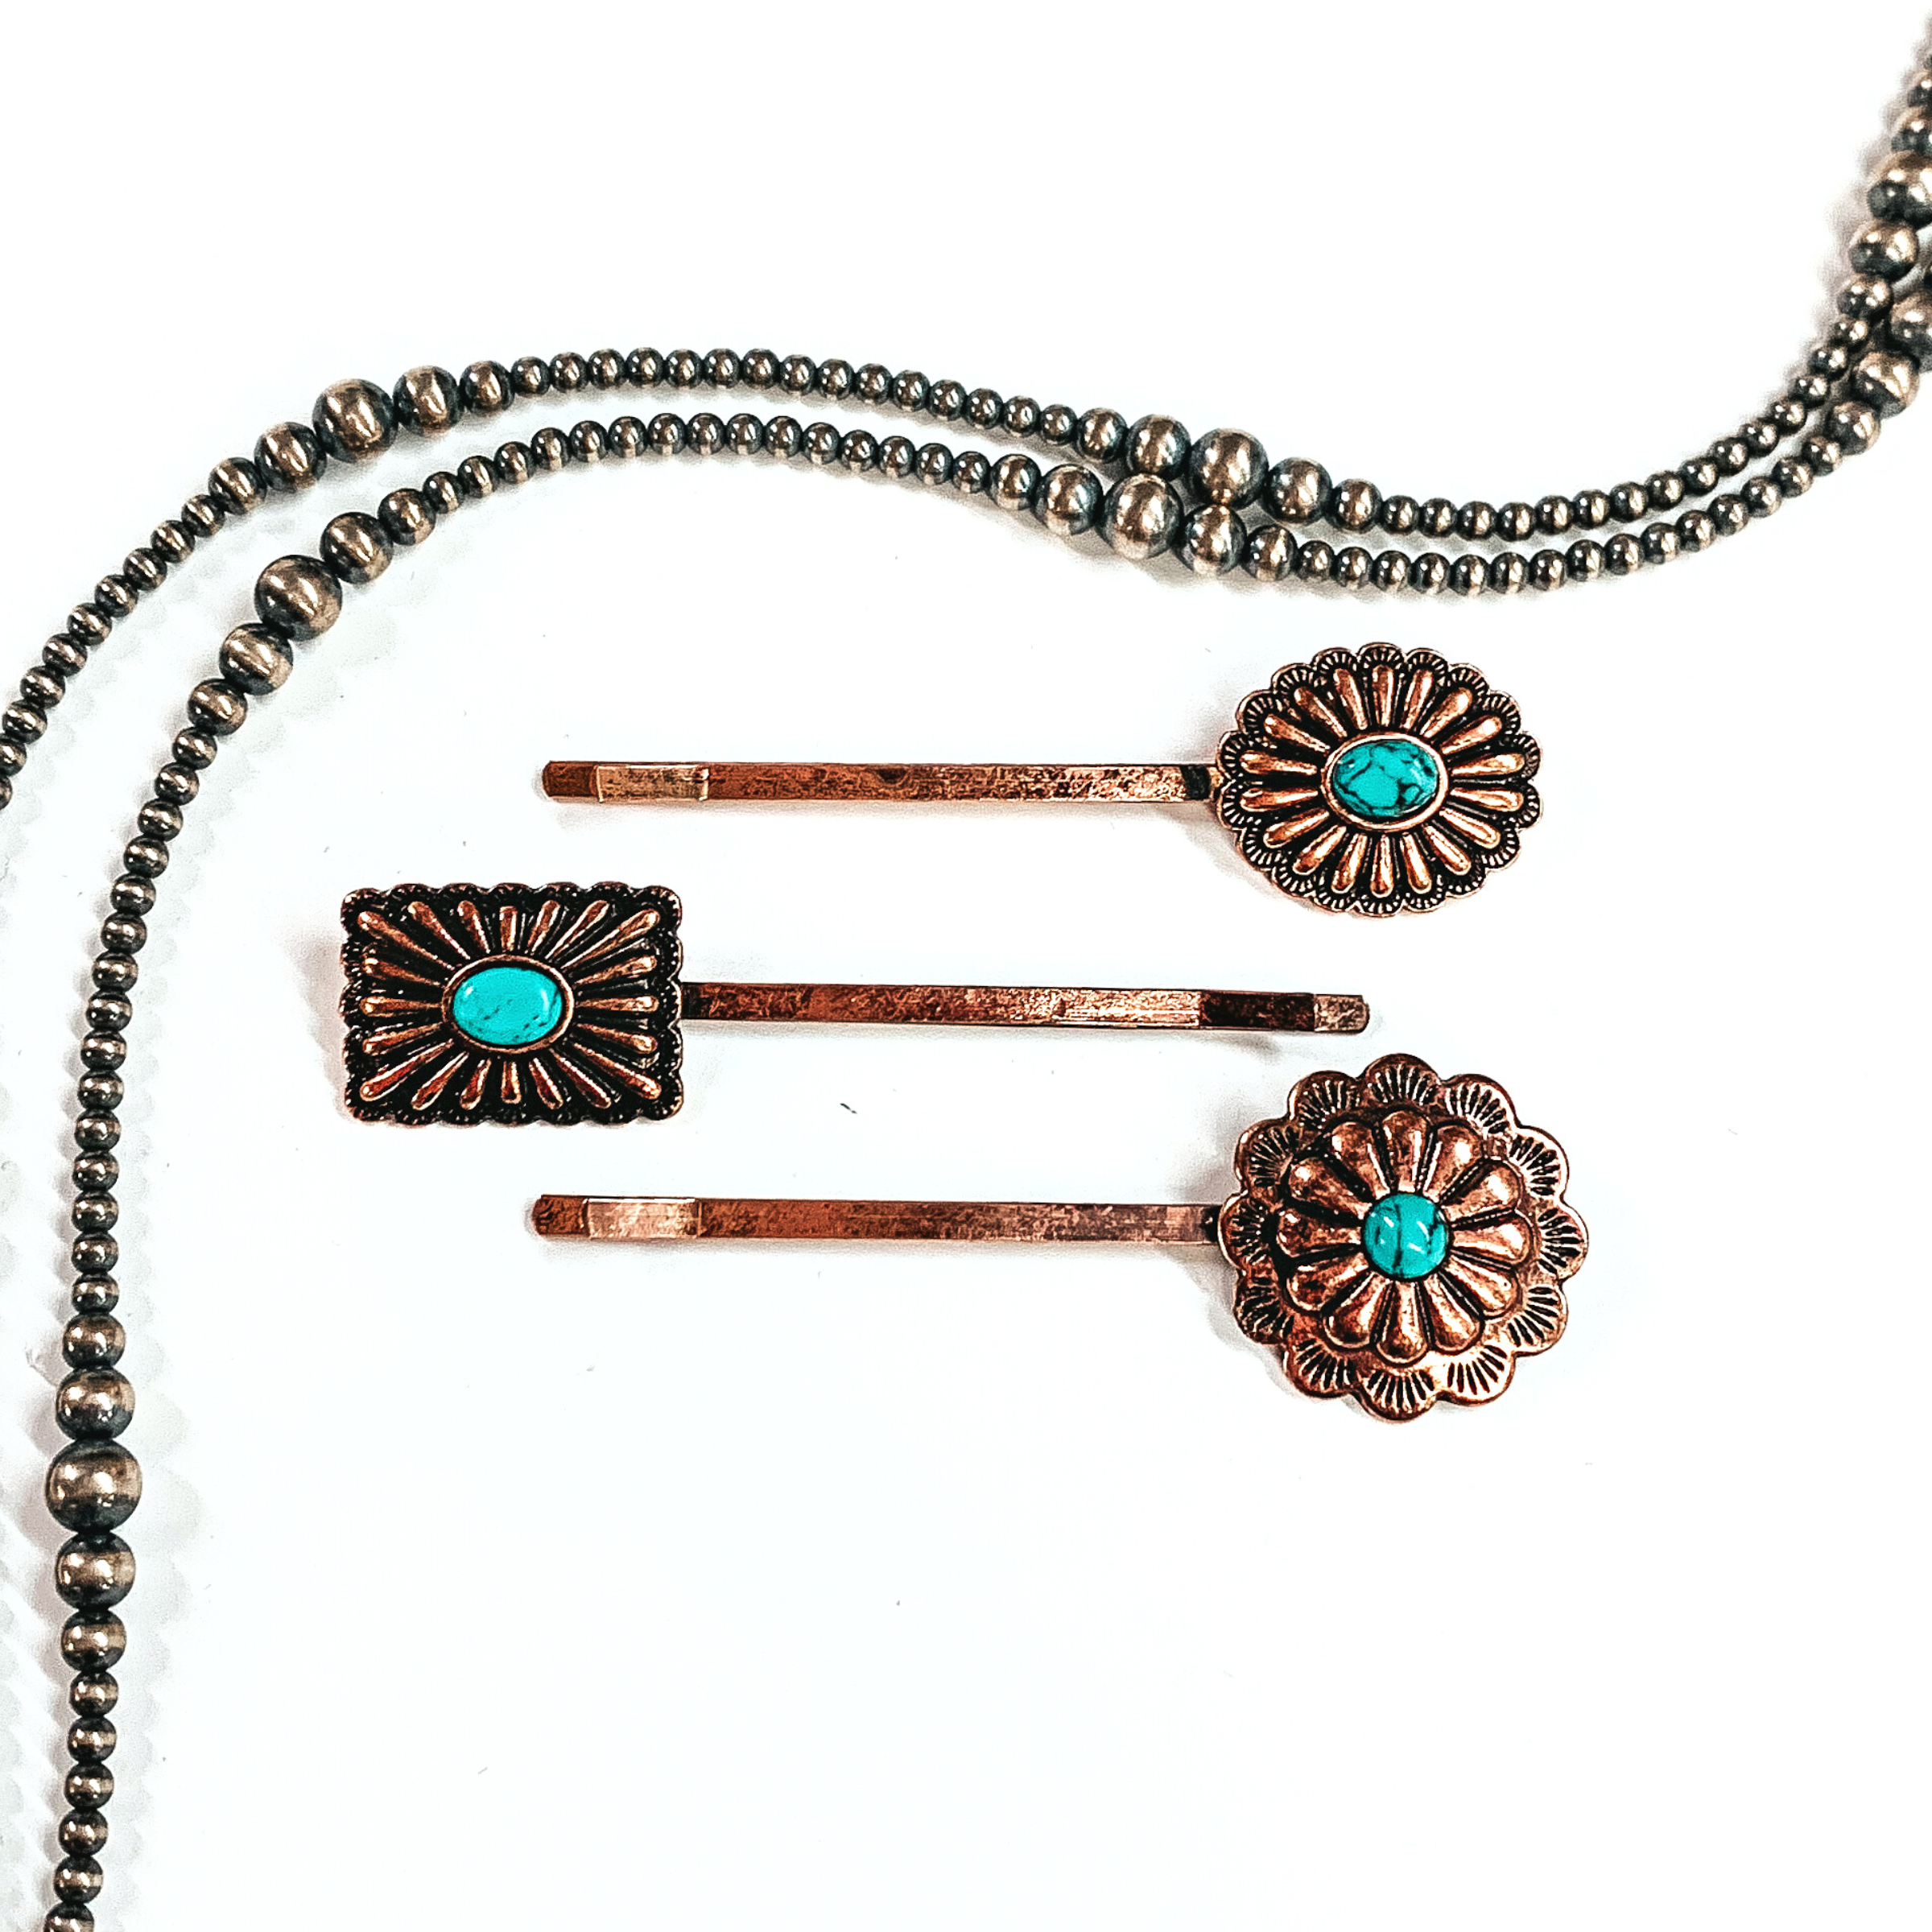 There are three copper bobby pins with conchos and a small faux turquoise stones  in the center of the concho. From top to bottom; an oval concho, rectangle/square  concho, and then a flower concho. These bobby pins are taken on a white background  with silver navajo pearls around as decor.